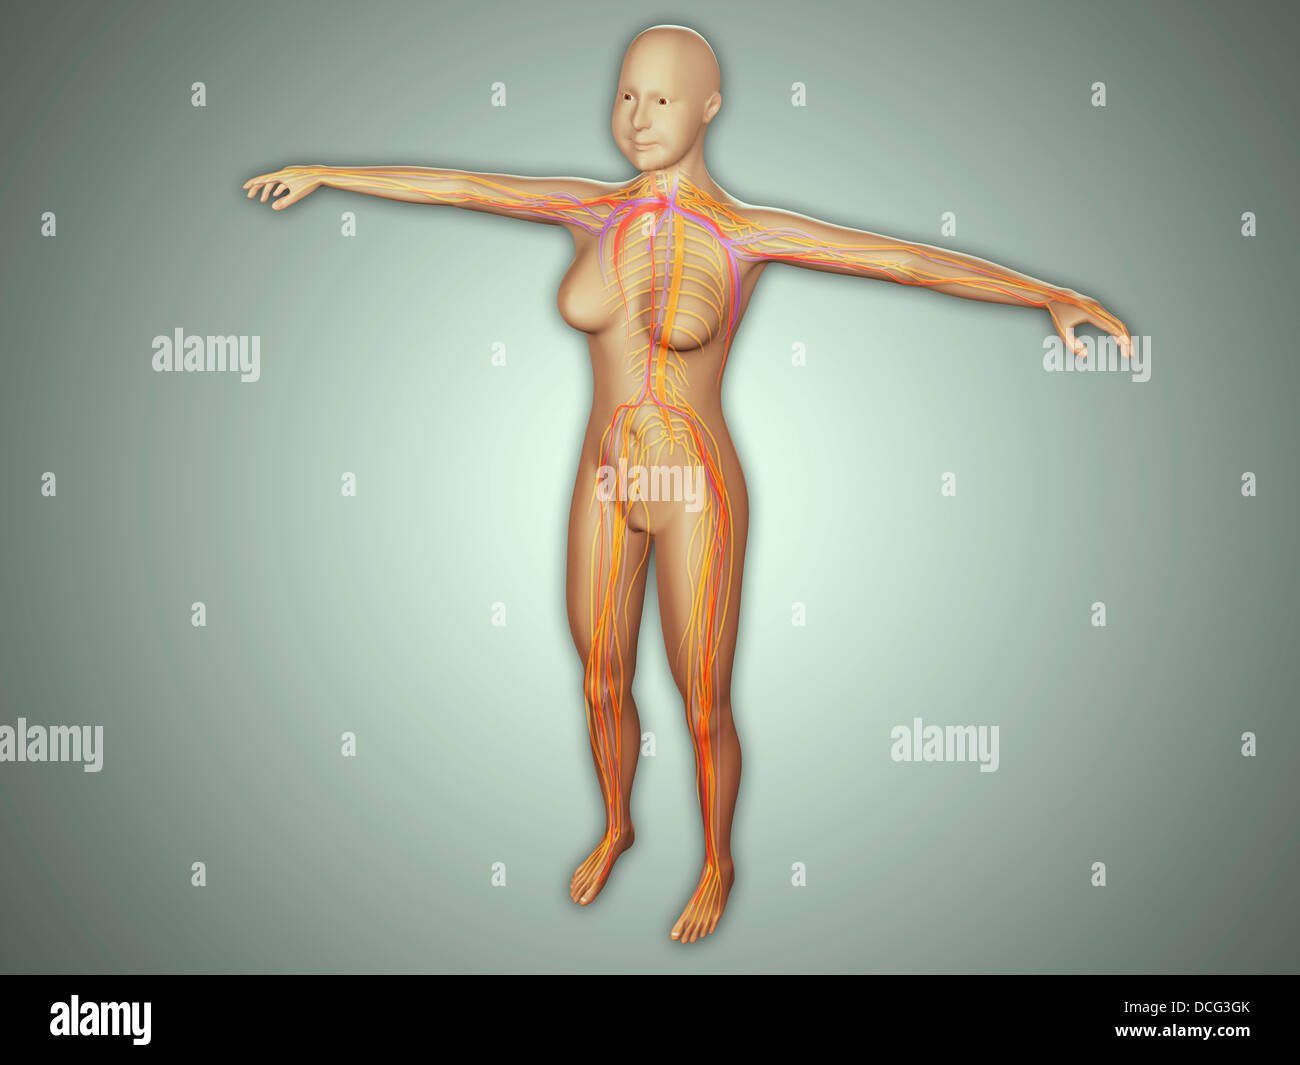 Anatomy of female body with arteries, veins and nervous system. Stock Photo